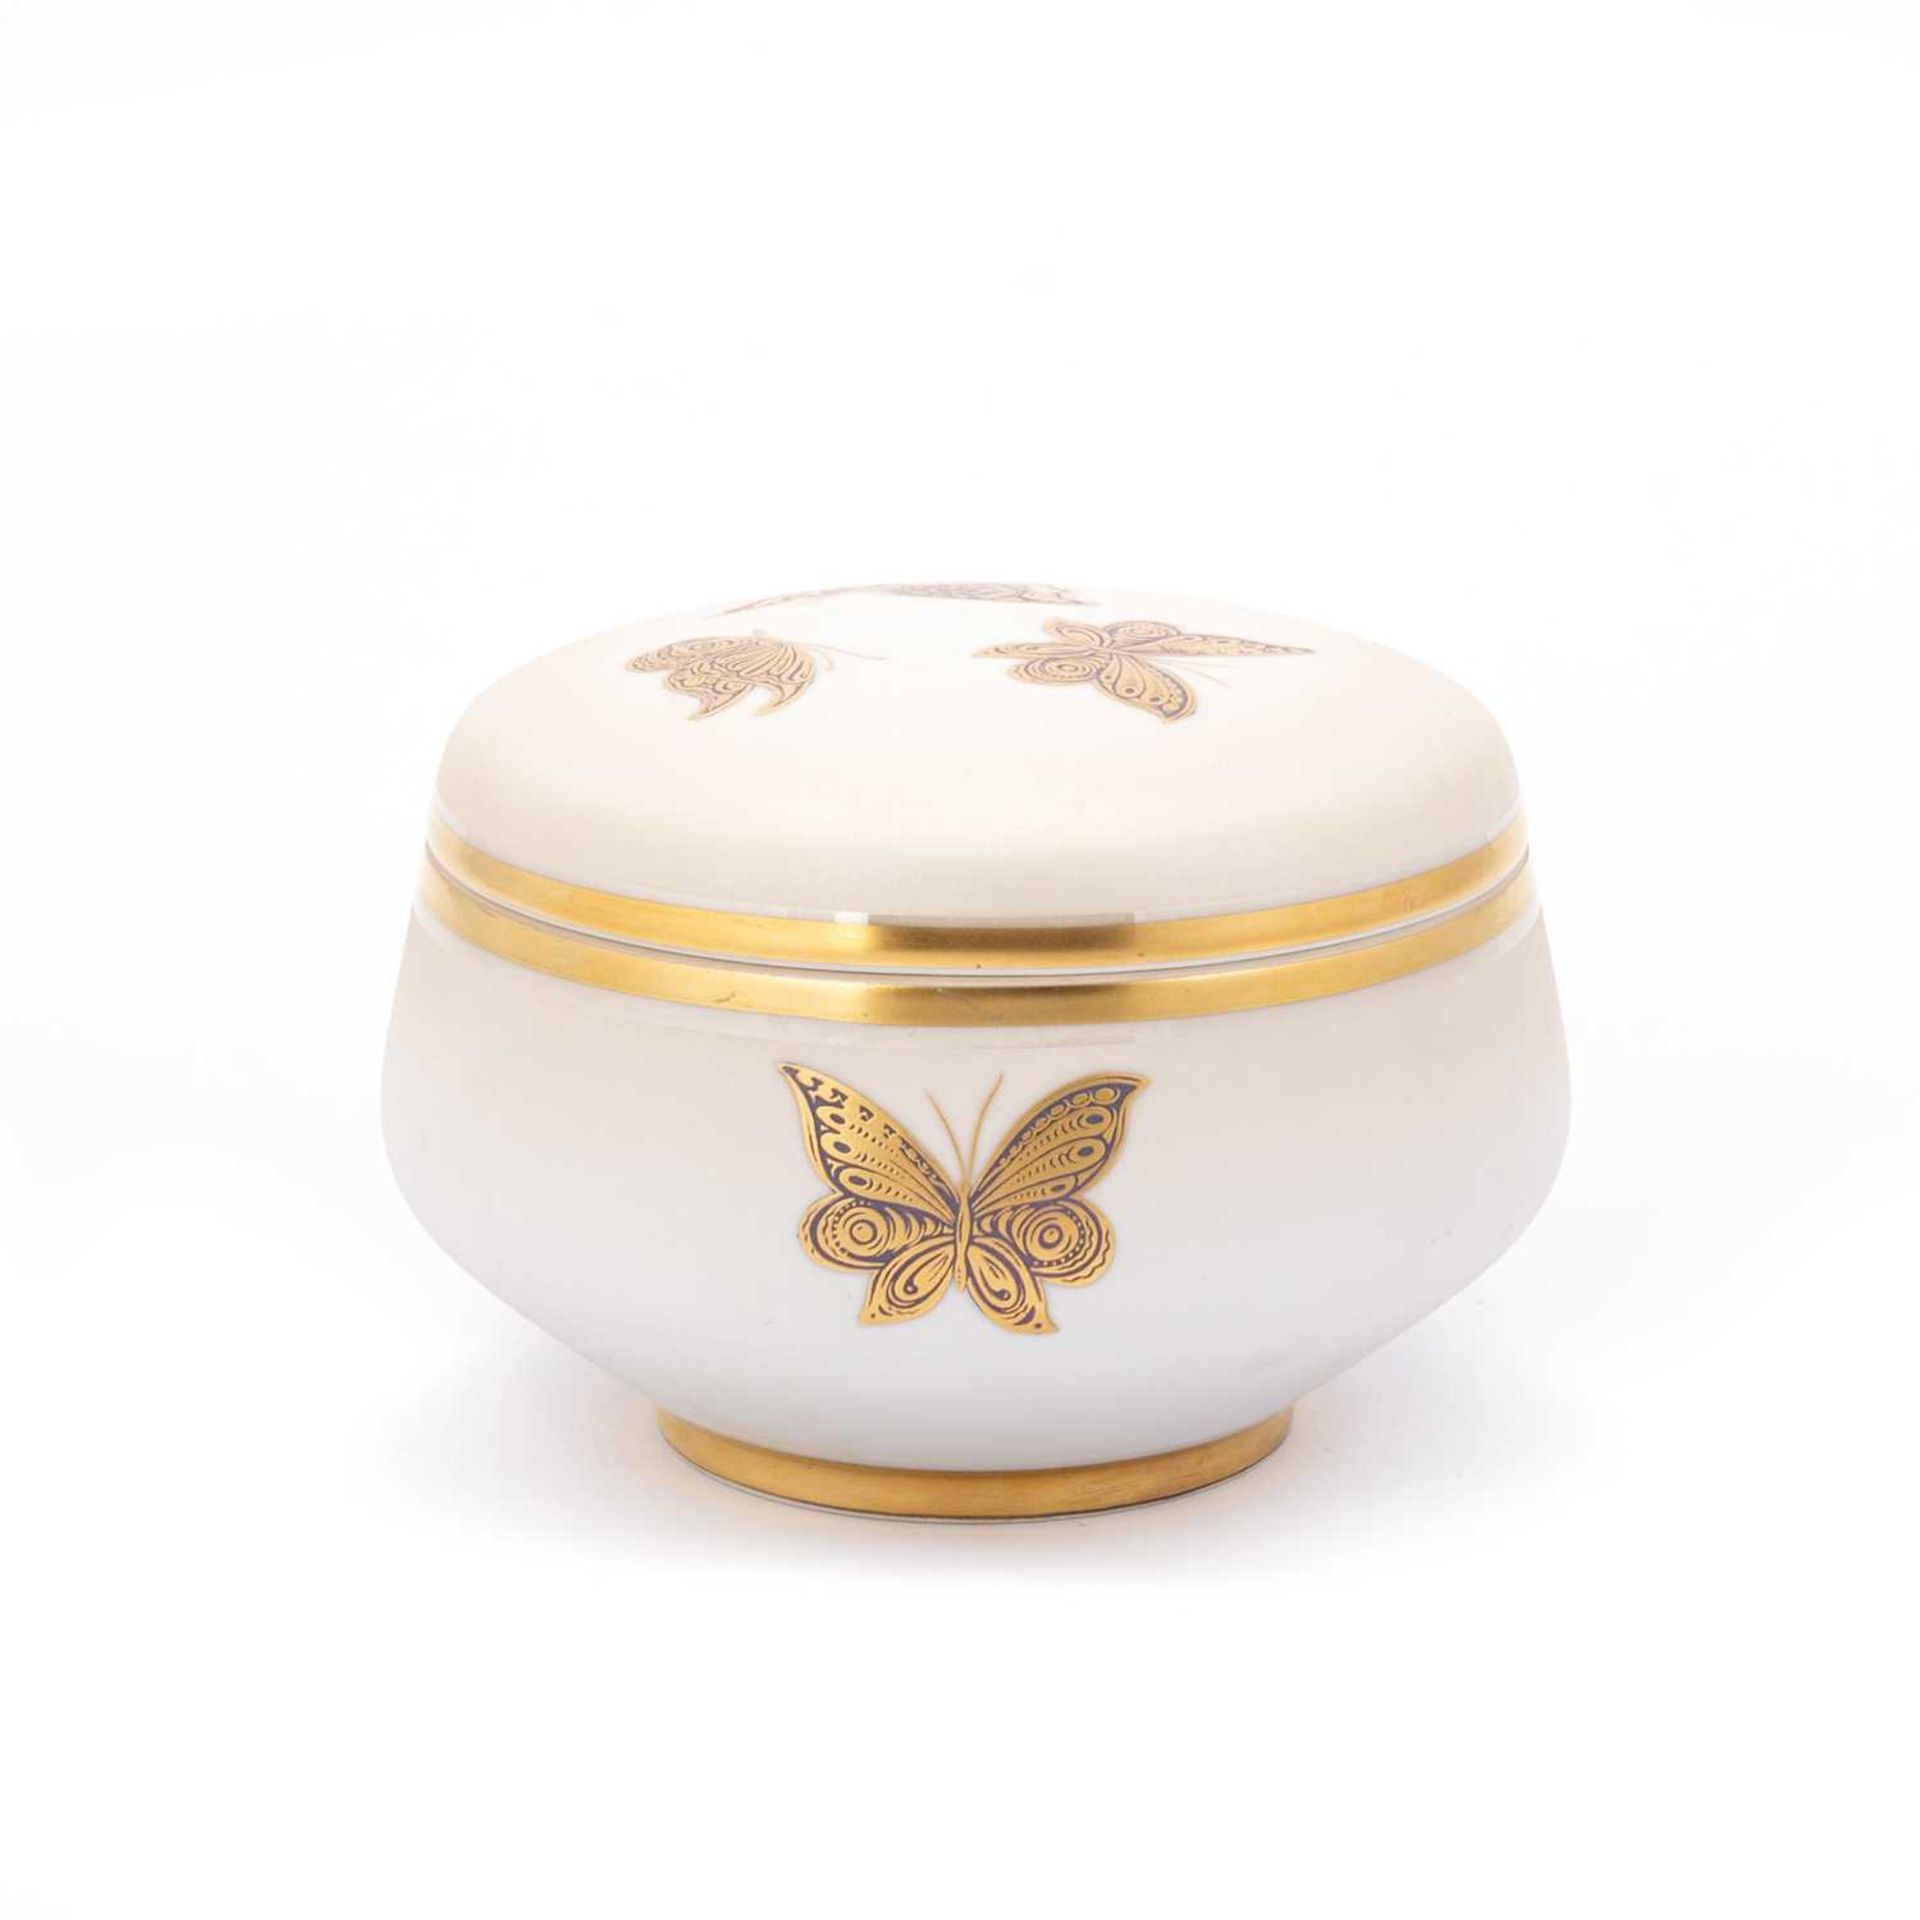 A MID-CENTURY ITALIAN PORCELAIN JEWELLERY BOX BY LONGO, LATE 1960S - Image 2 of 4